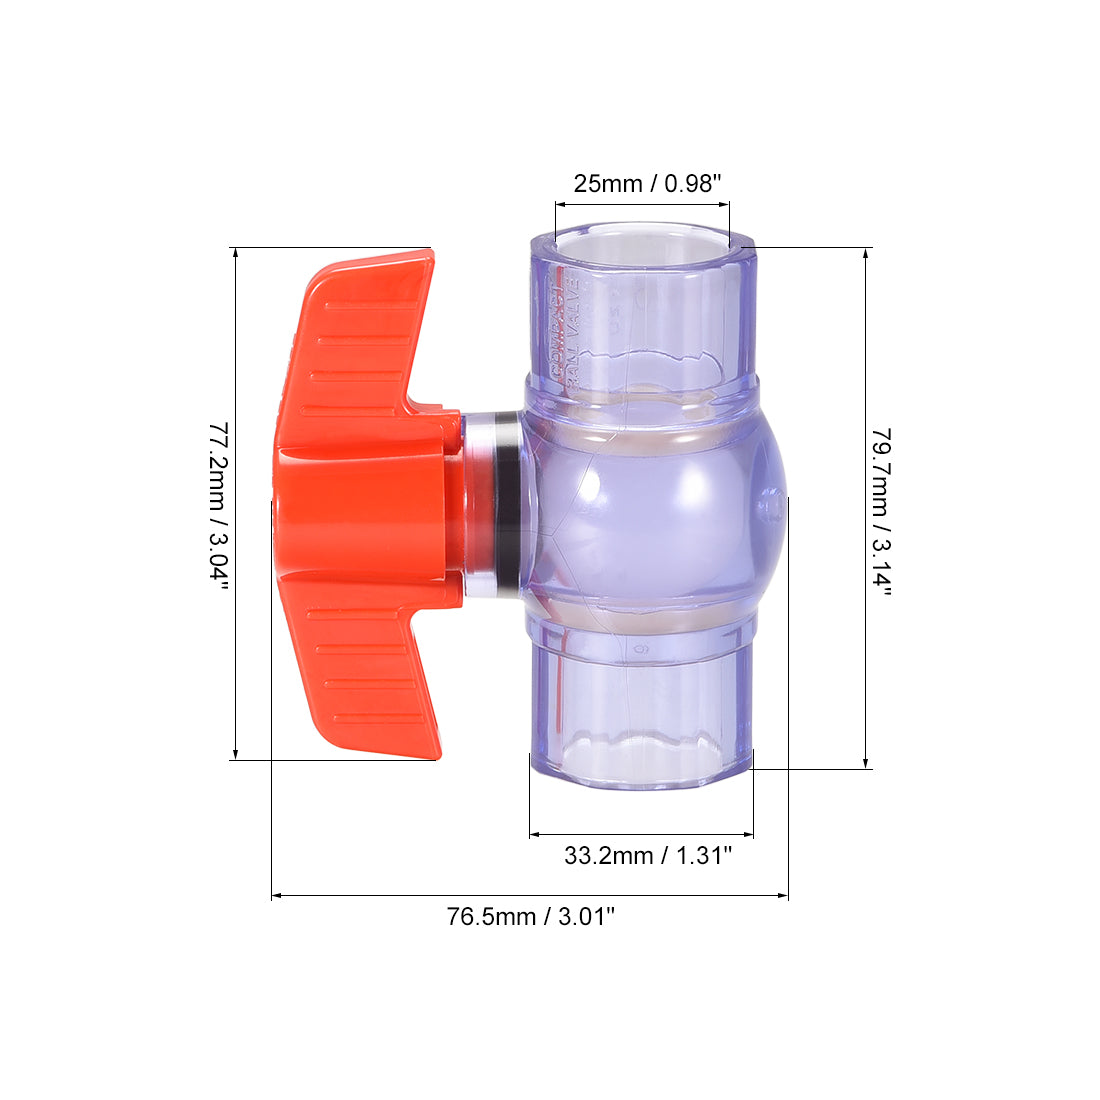 Uxcell Uxcell Ball Valve, 32mm Inner Diameter DN25, Socket Type, for Control Water Flow, PVC Clear Blue